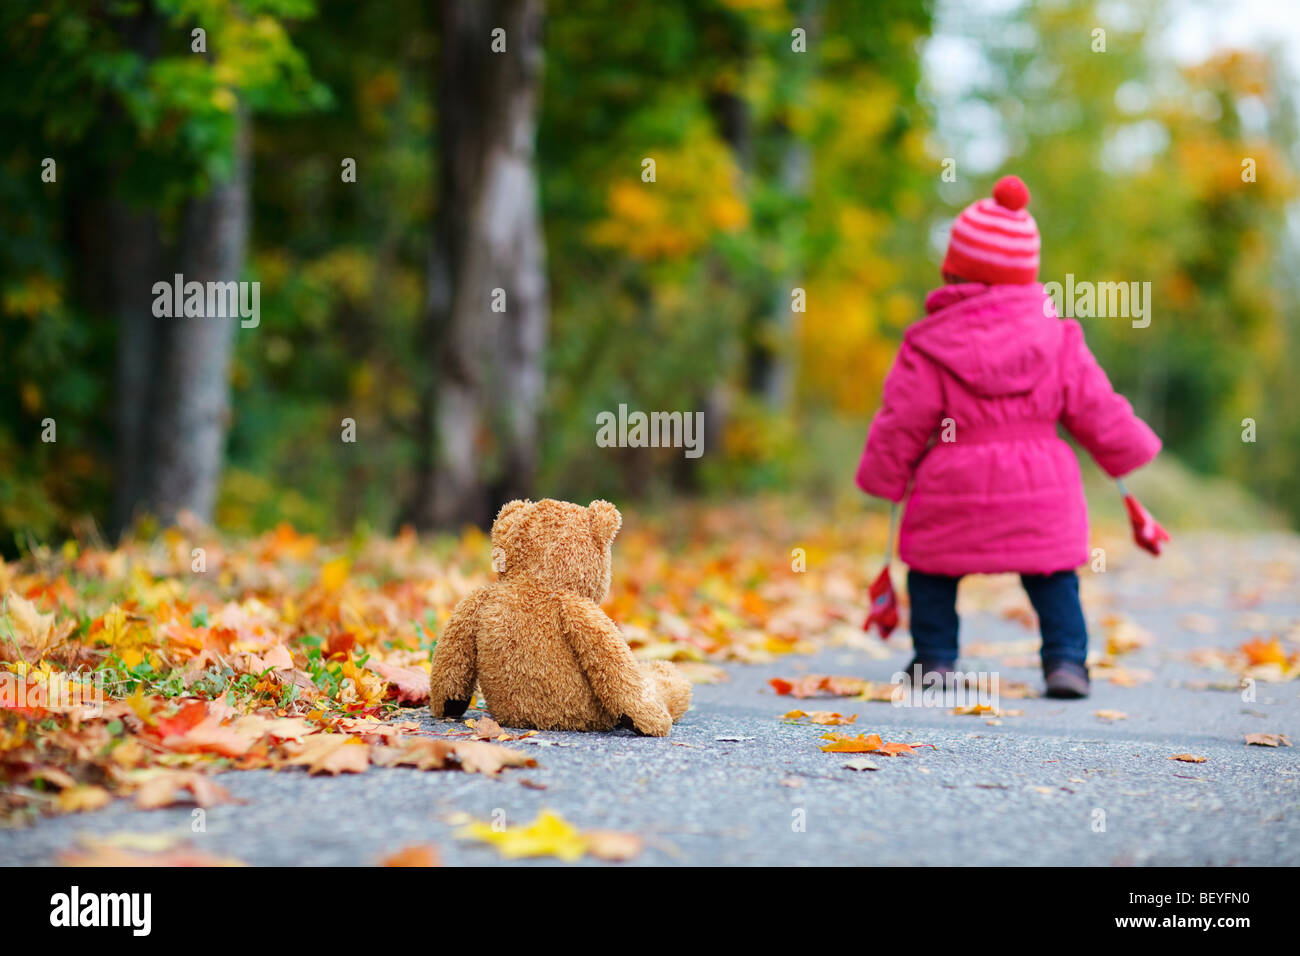 Cute 1 year old baby girl walking outdoors Stock Photo